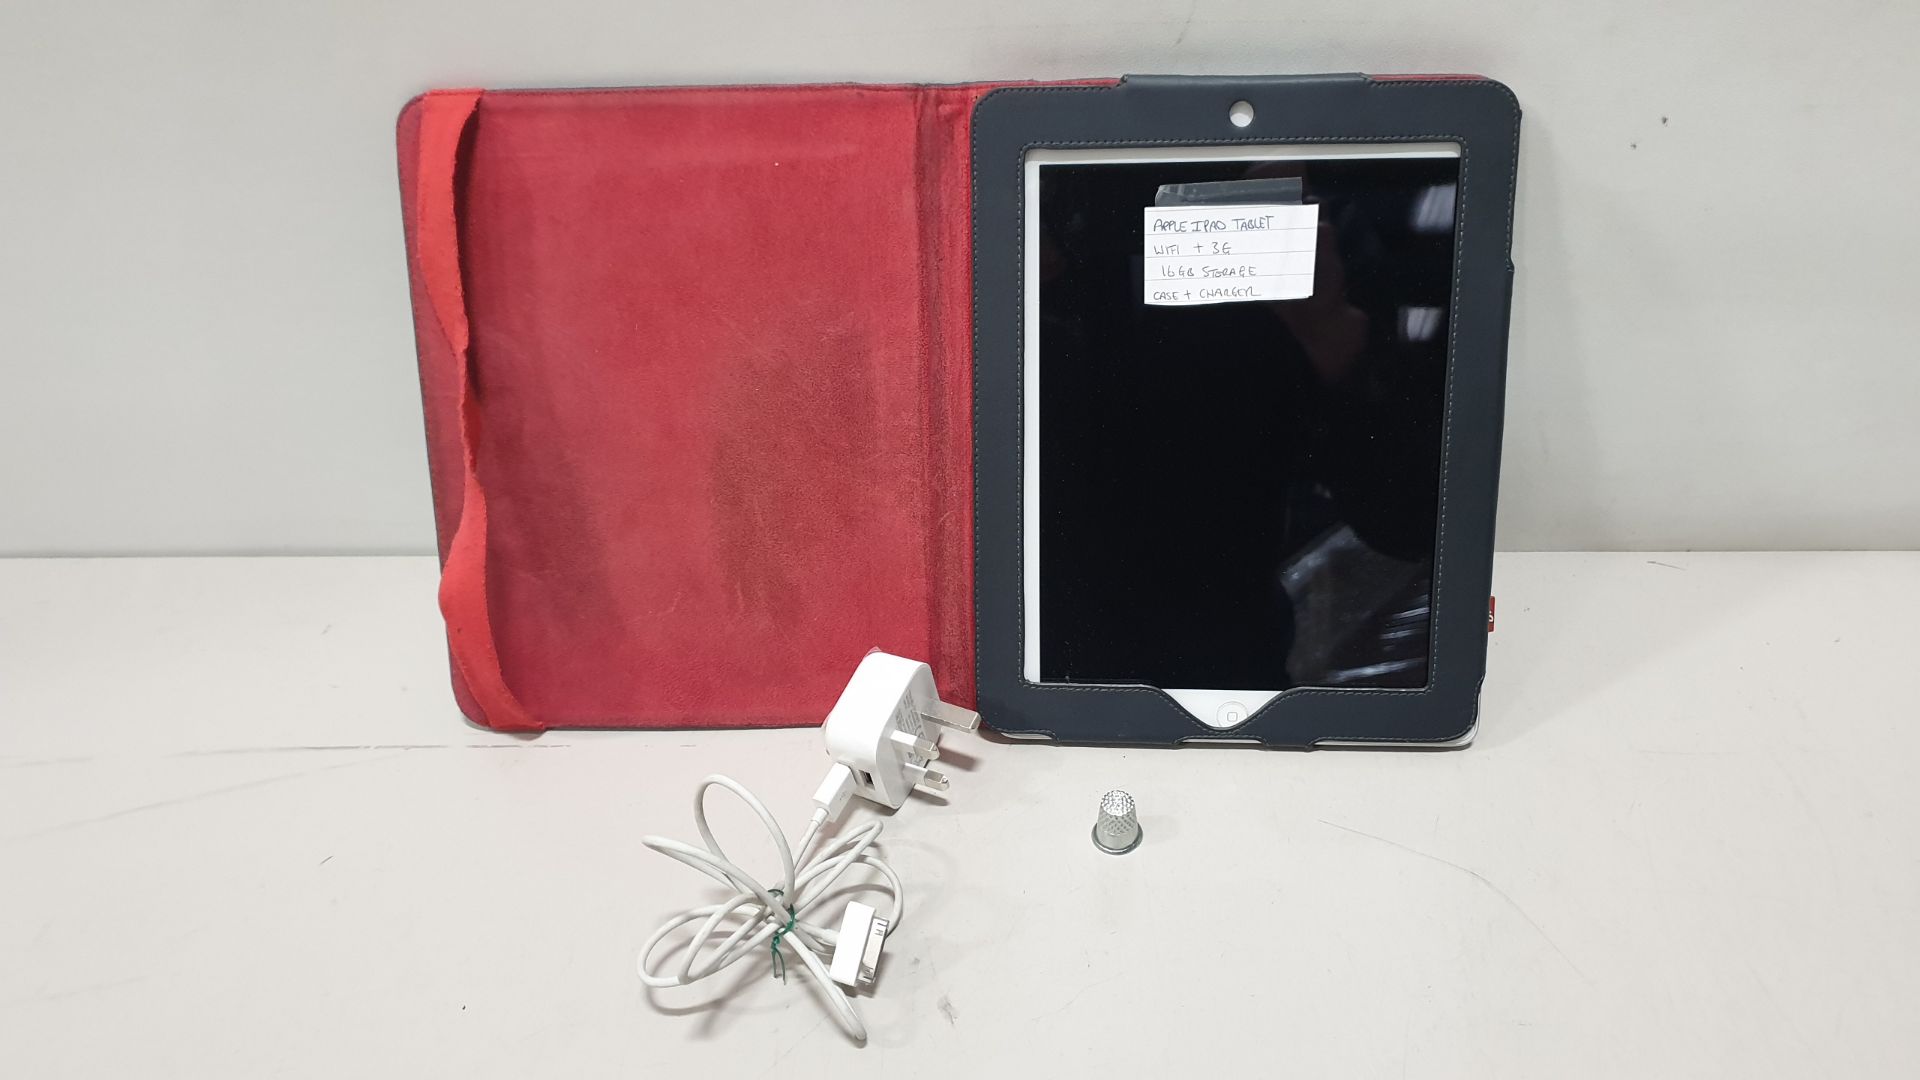 APPLE IPAD TABLET WIFI + 3G 16GB STORAGE INCLUDES CASE AND CHARGER